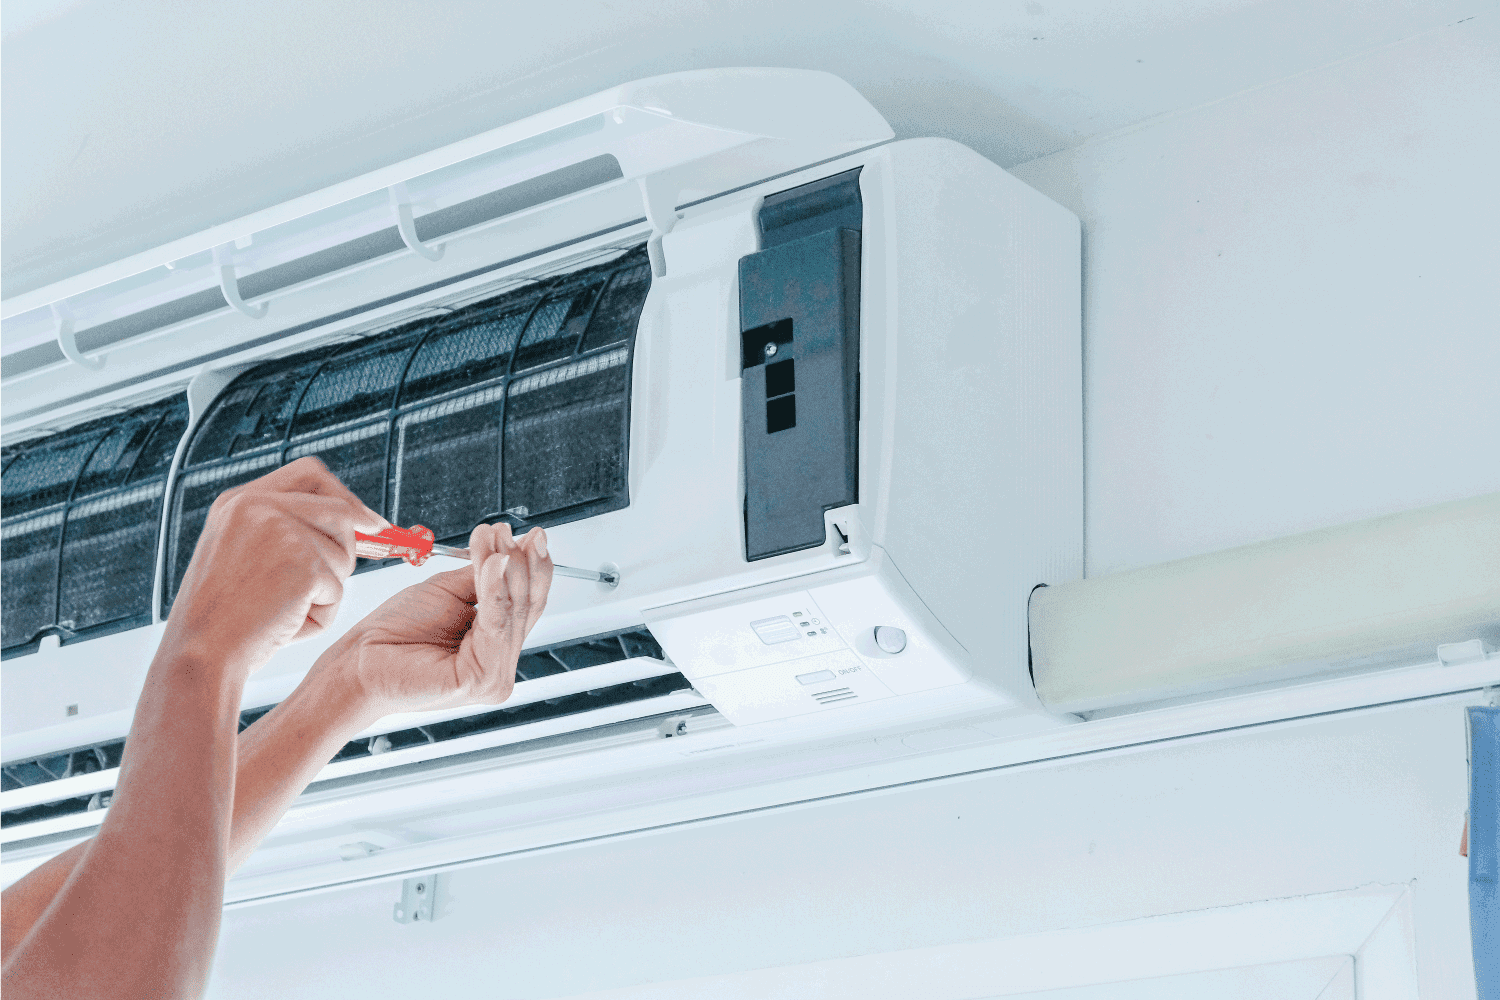 The technician repairing the air conditioner by use screwdriver